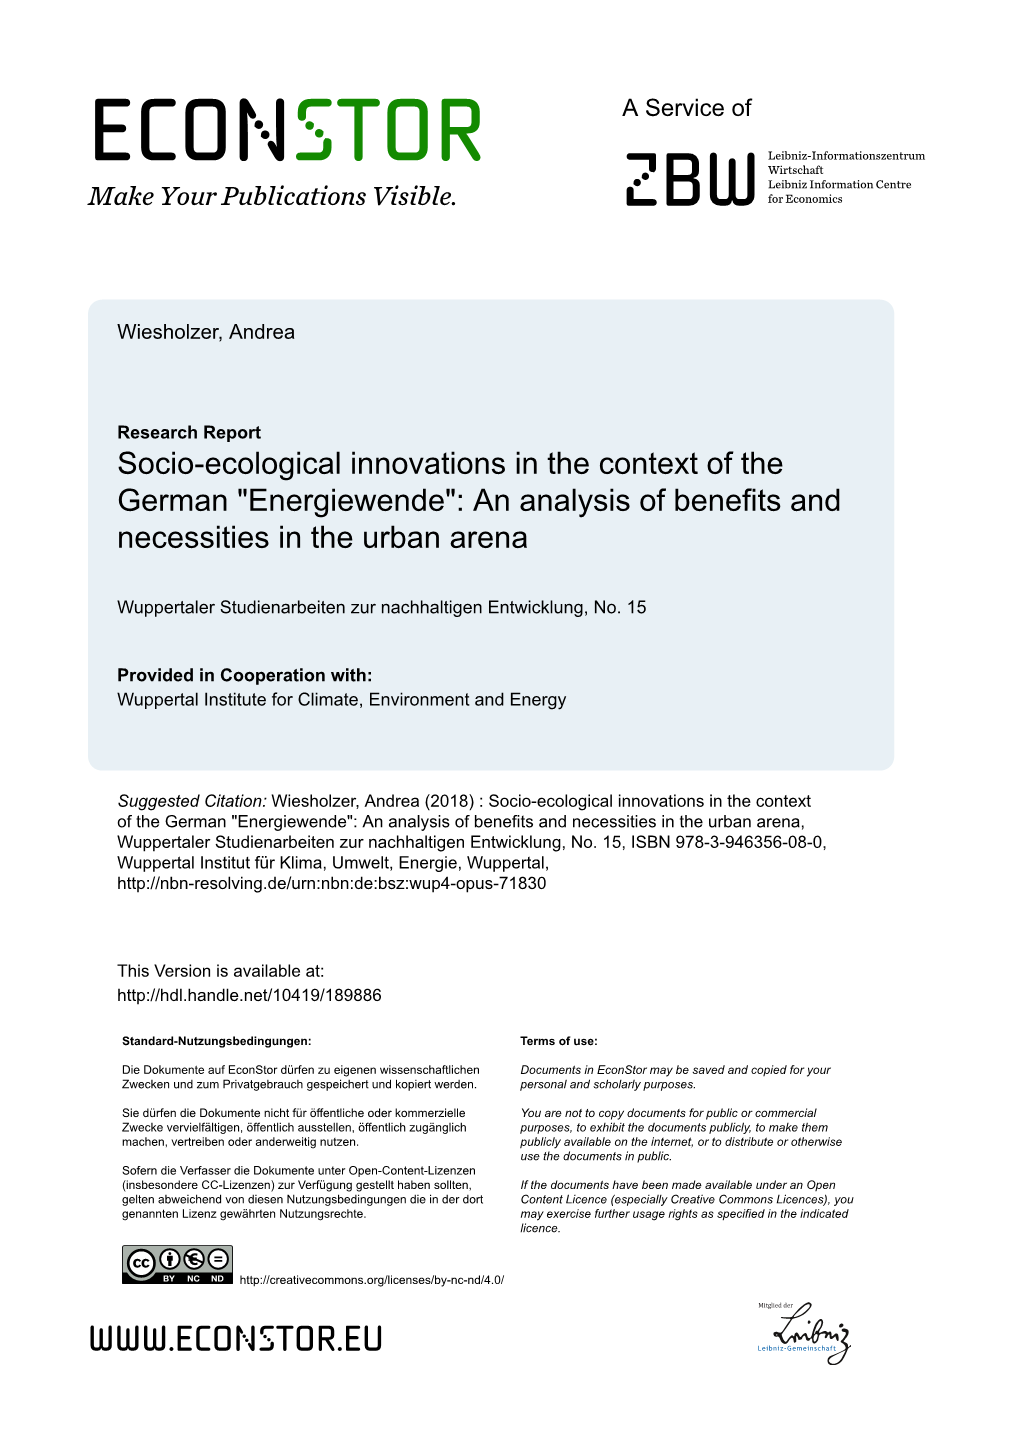 Socio-Ecological Innovations in the Context of the German "Energiewende": an Analysis of Benefits and Necessities in the Urban Arena